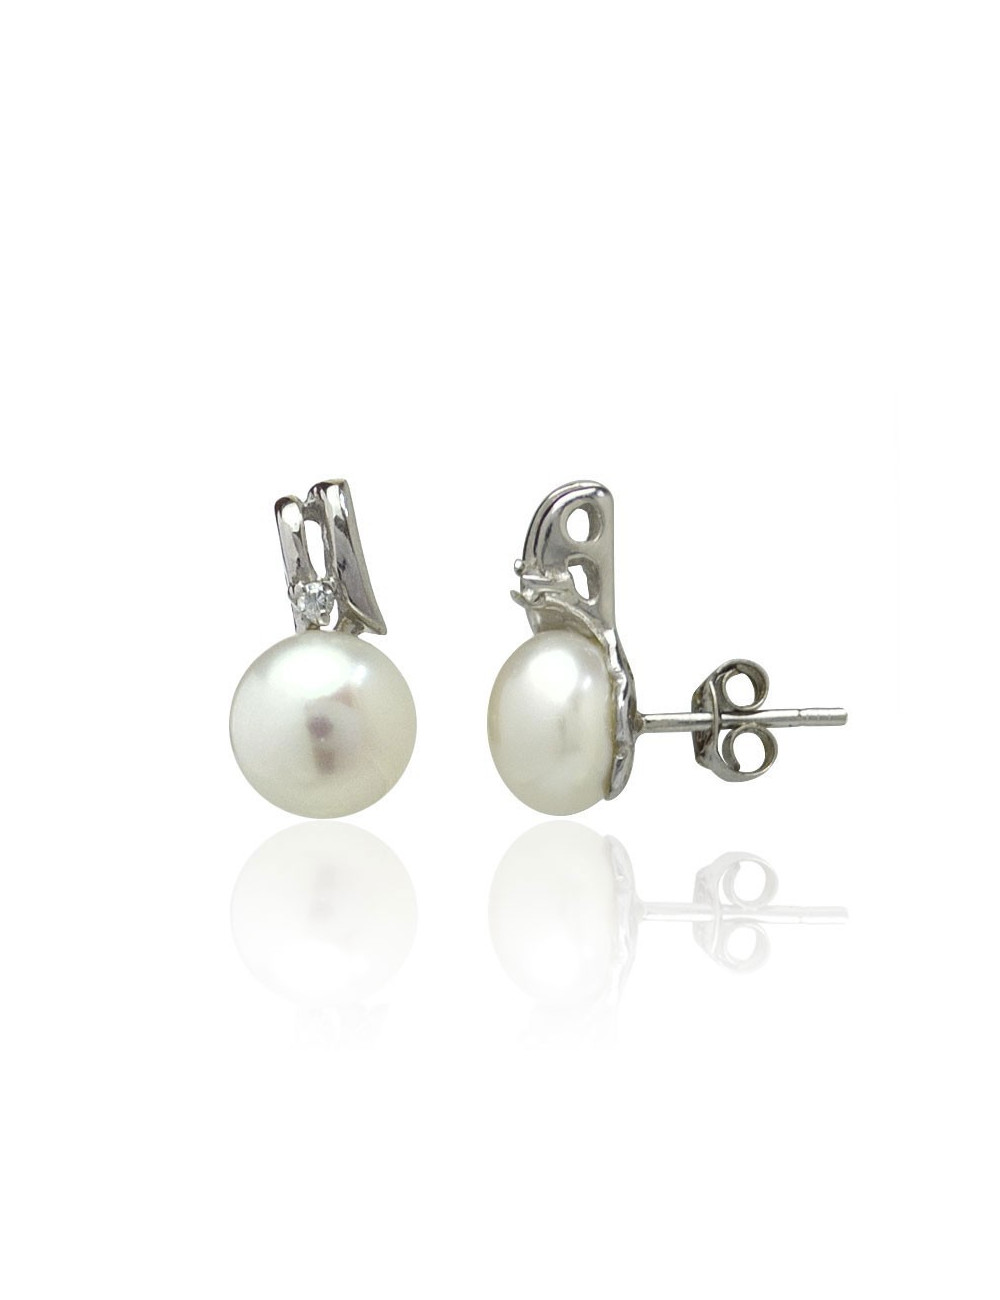 Silver earrings with freshwater pearls and zircons SE0018S